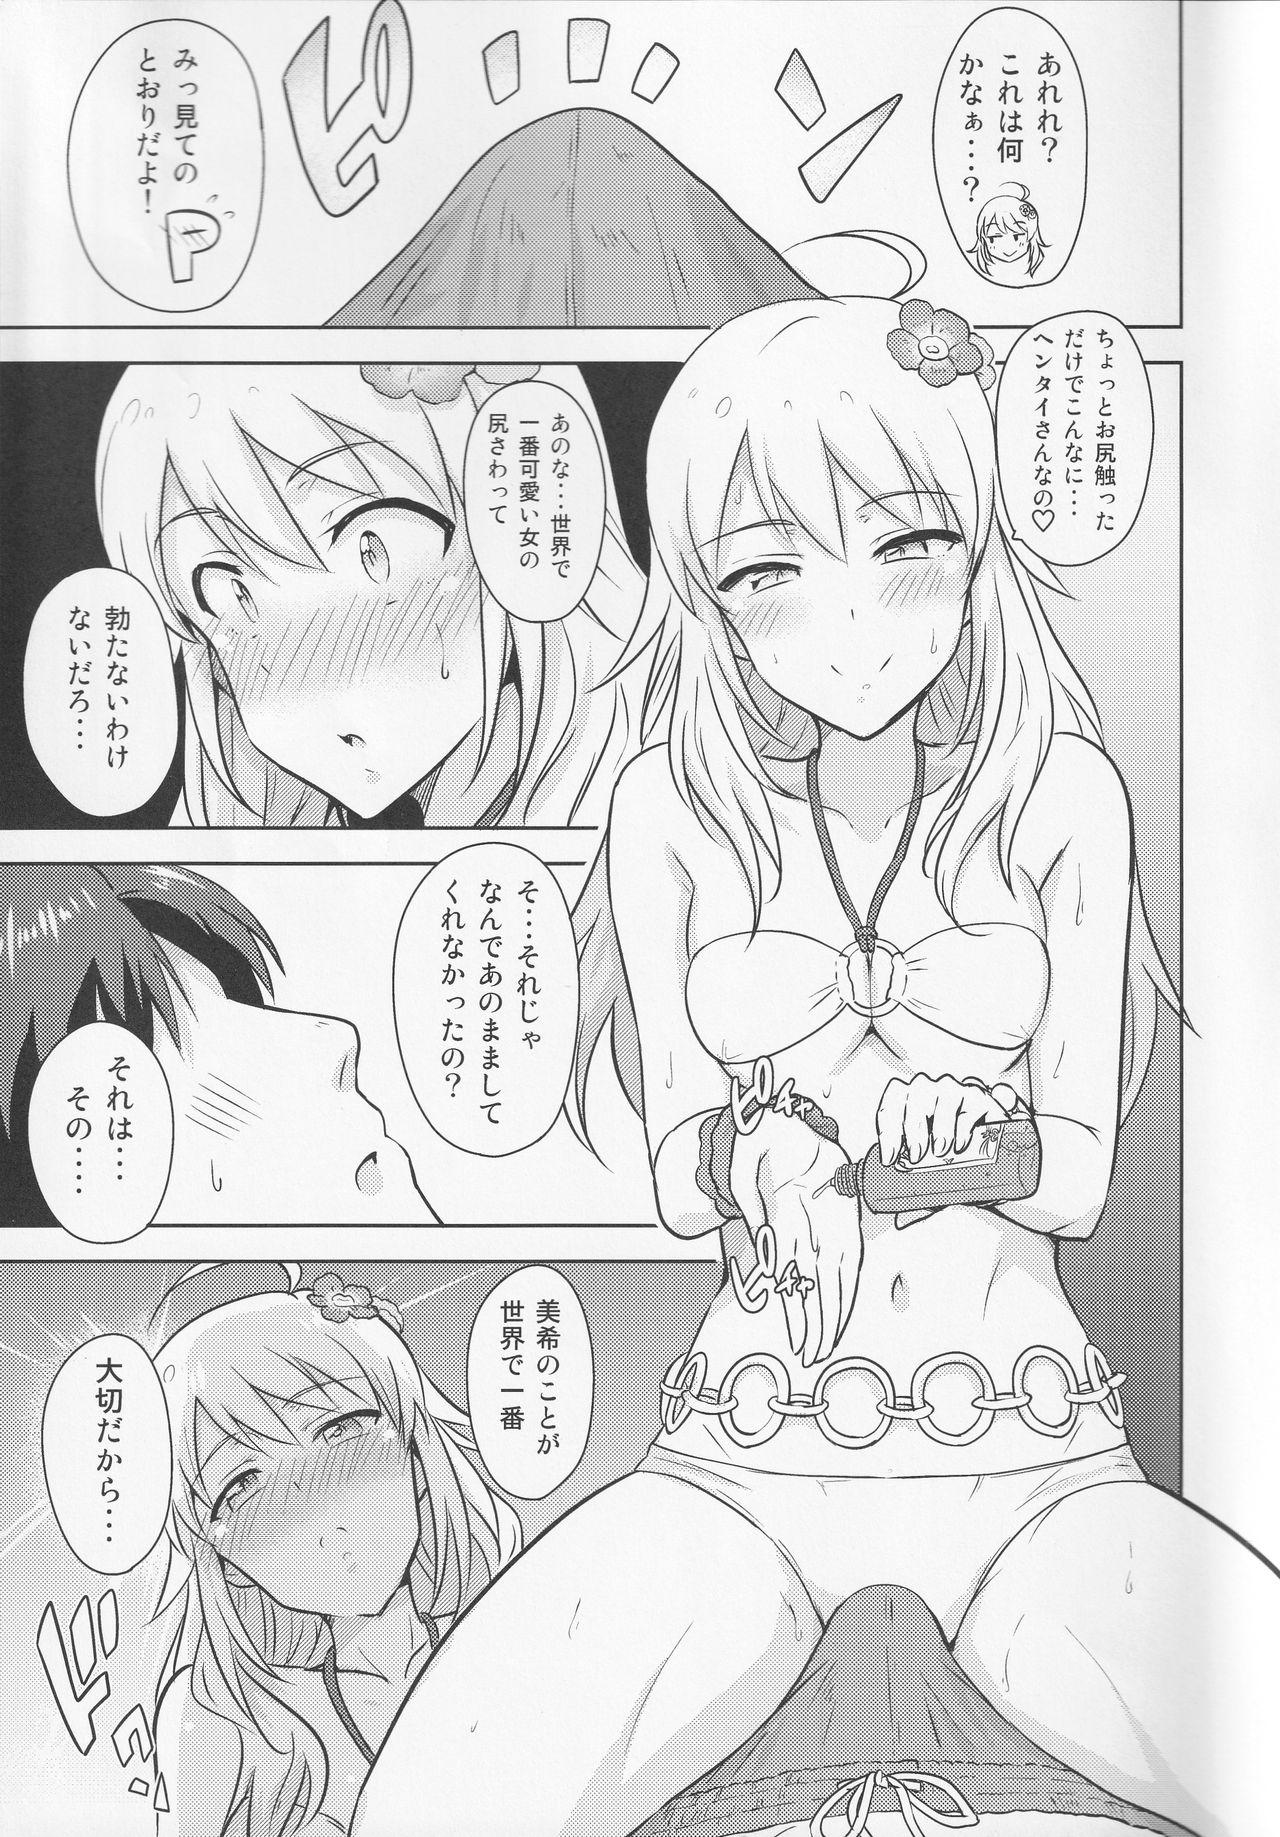 Chacal Oshiete MY HONEY 2 Zenpen - The idolmaster Collar - Page 8